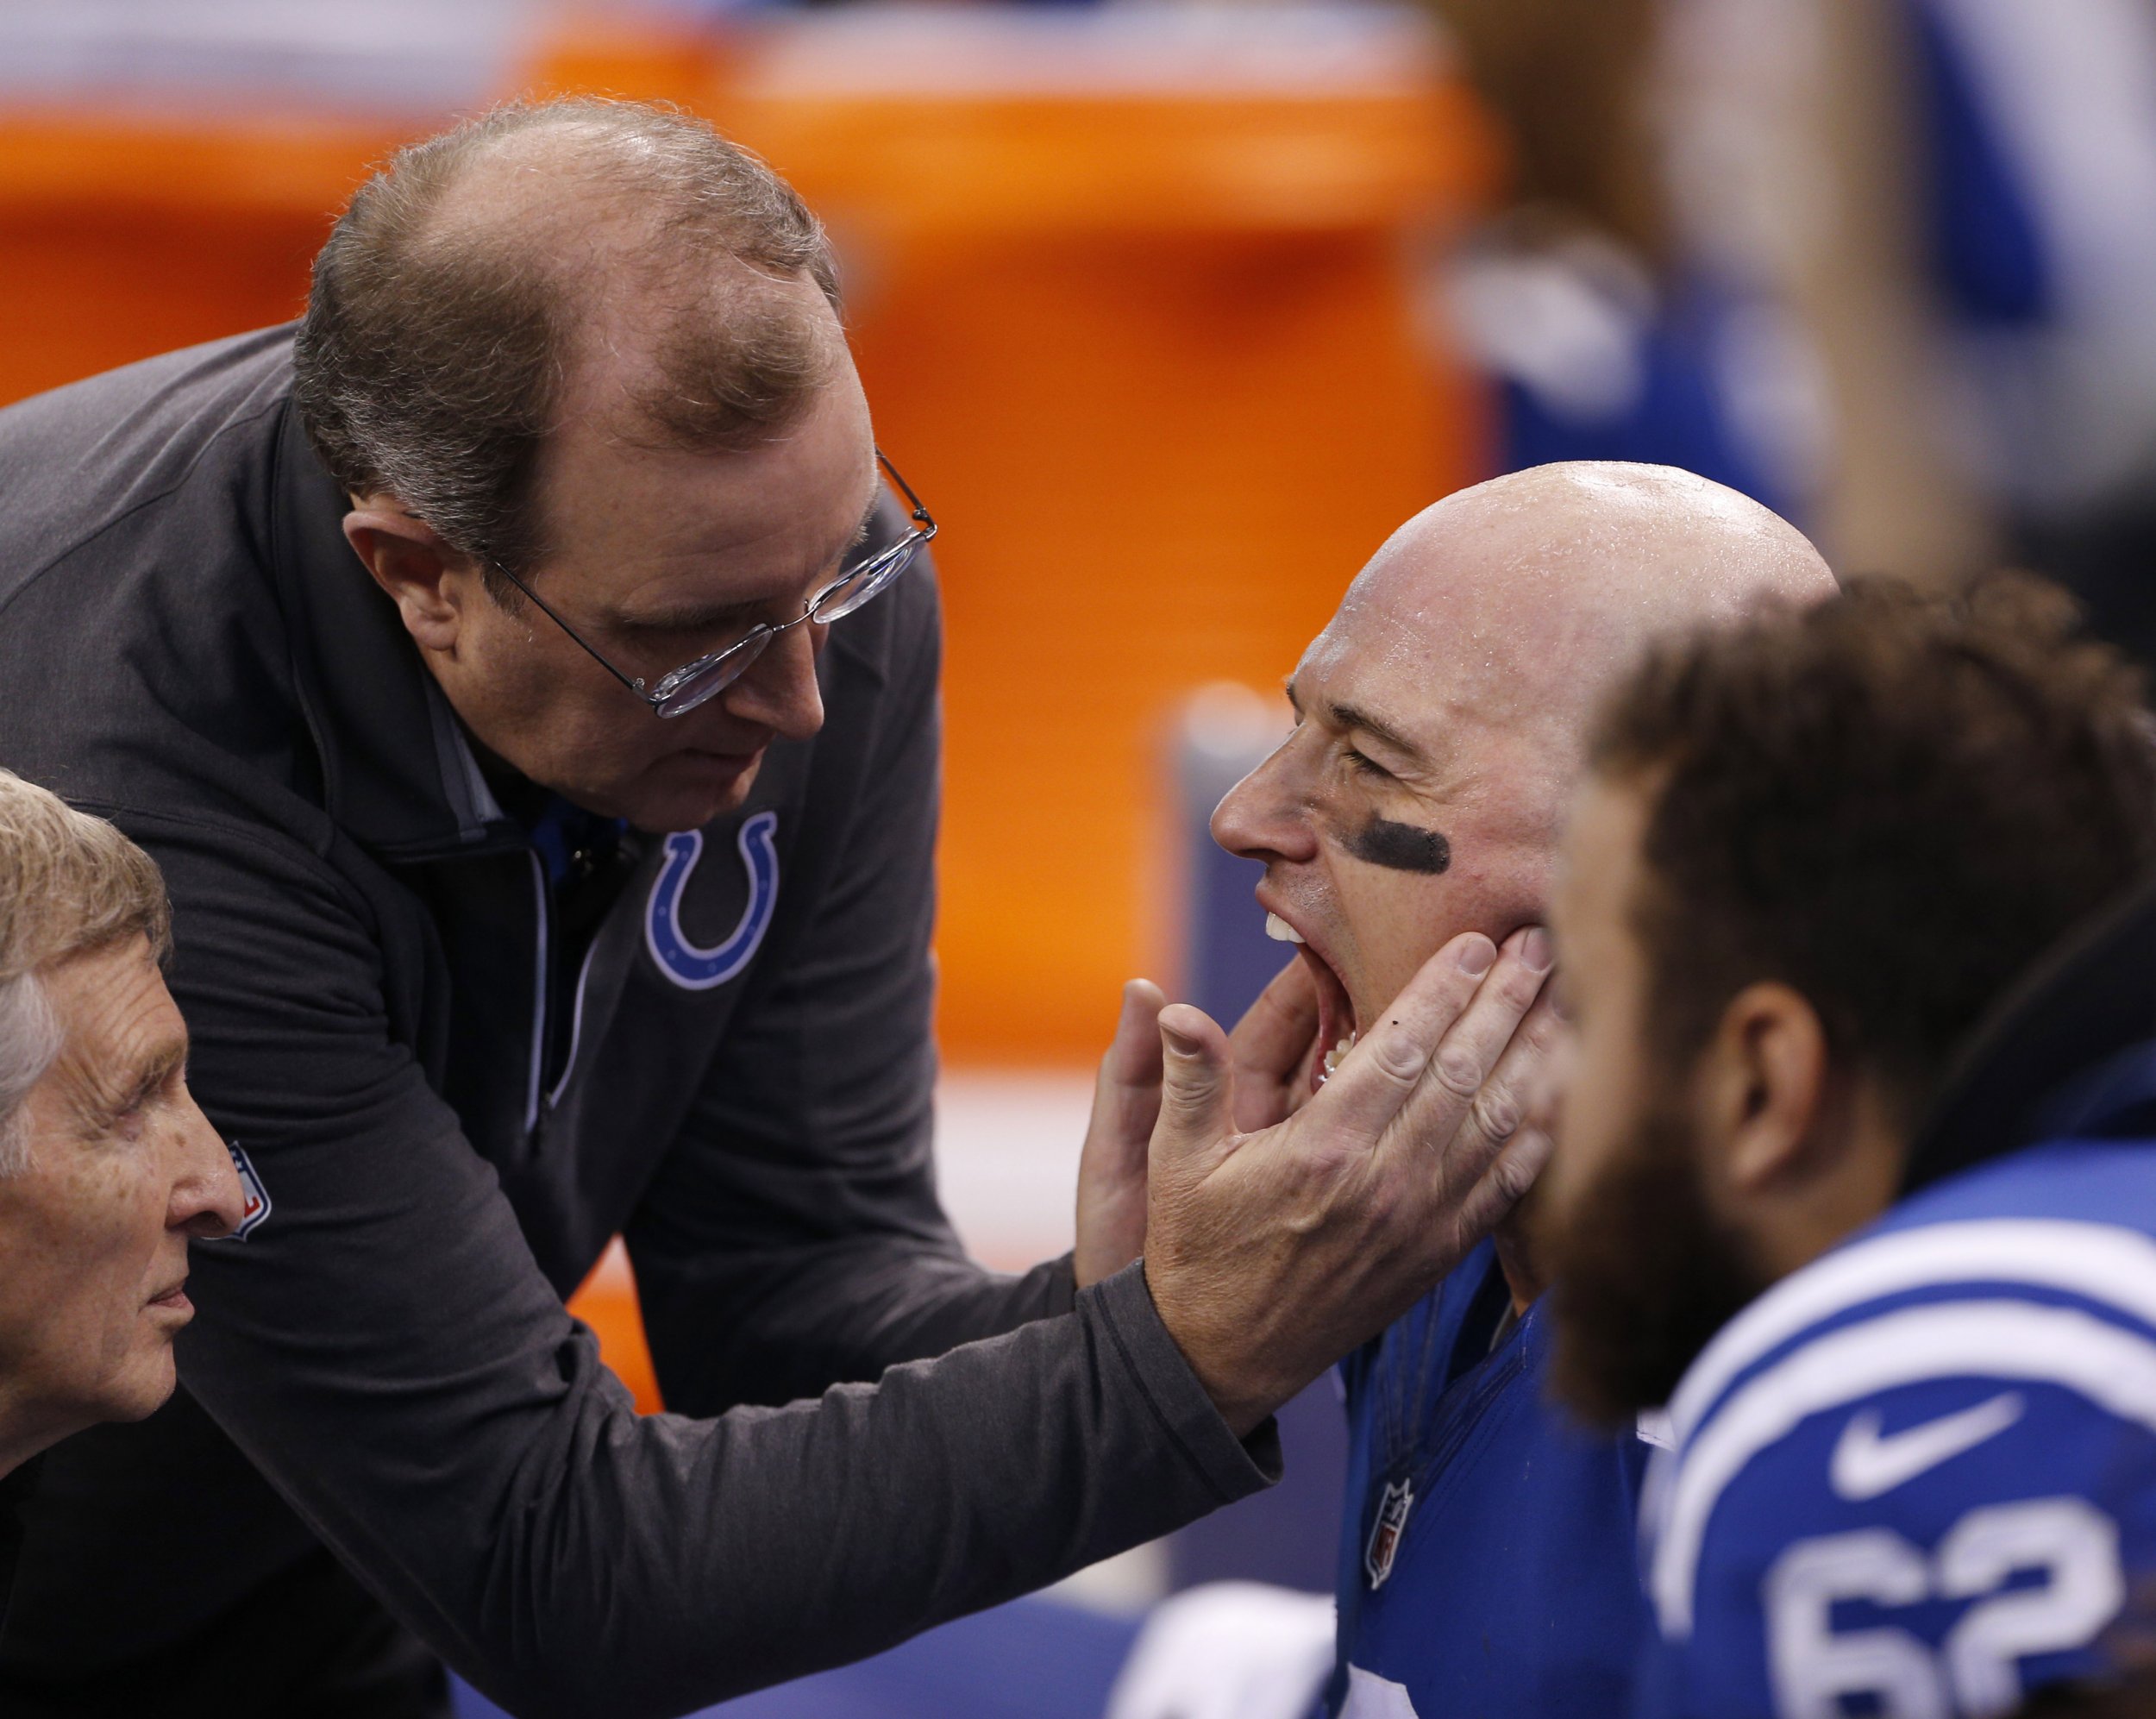 Former Indianapolis Colts quarterback Matt Hasselbeck (8) is examined by team doctors from the bench after being injured against the Houston Texans at Lucas Oil Stadium, Indianapolis, December 20 2015.